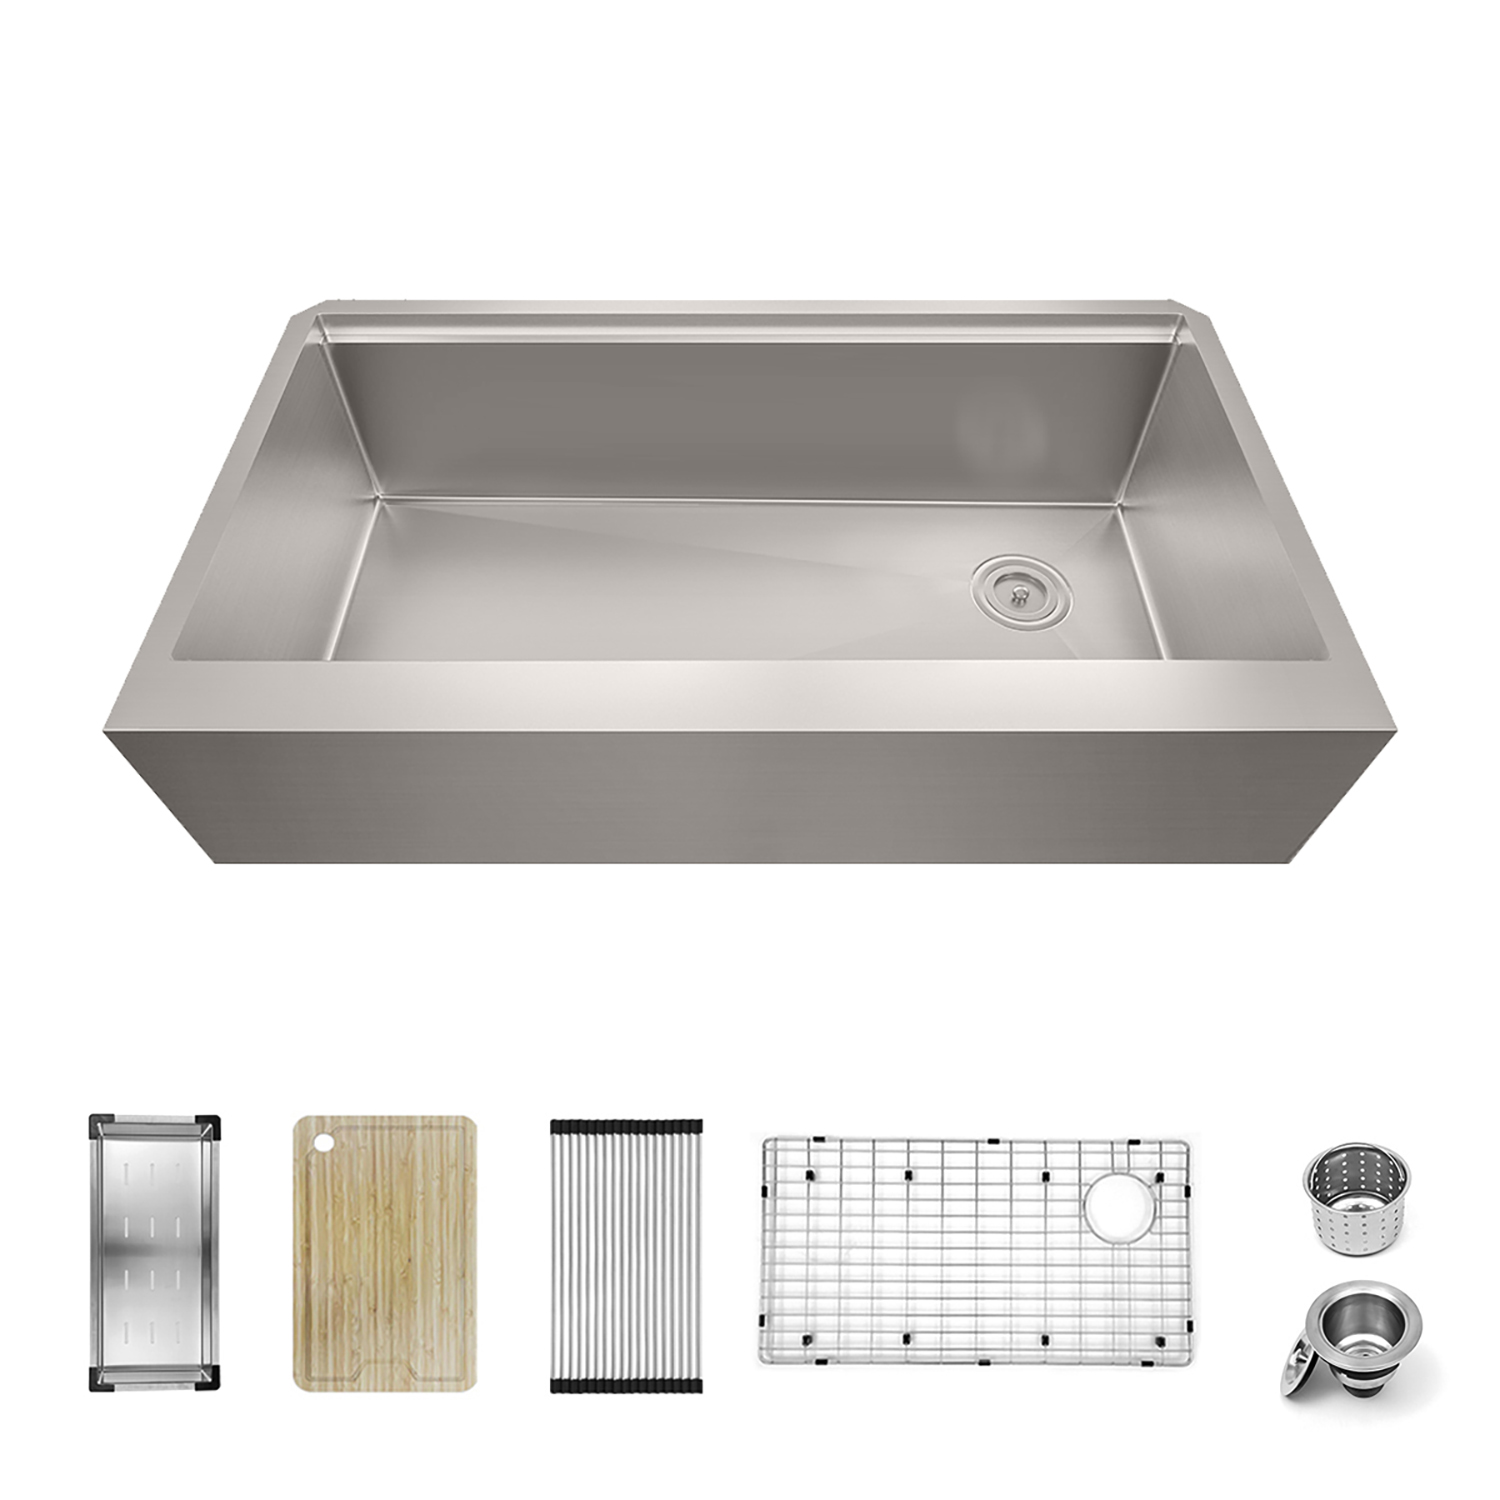 KSS0005S-OL 33" 16 Gauge Single Bowl 304 Stainless Steel Workstation Farmhouse Apron Kitchen Sink With Accessories